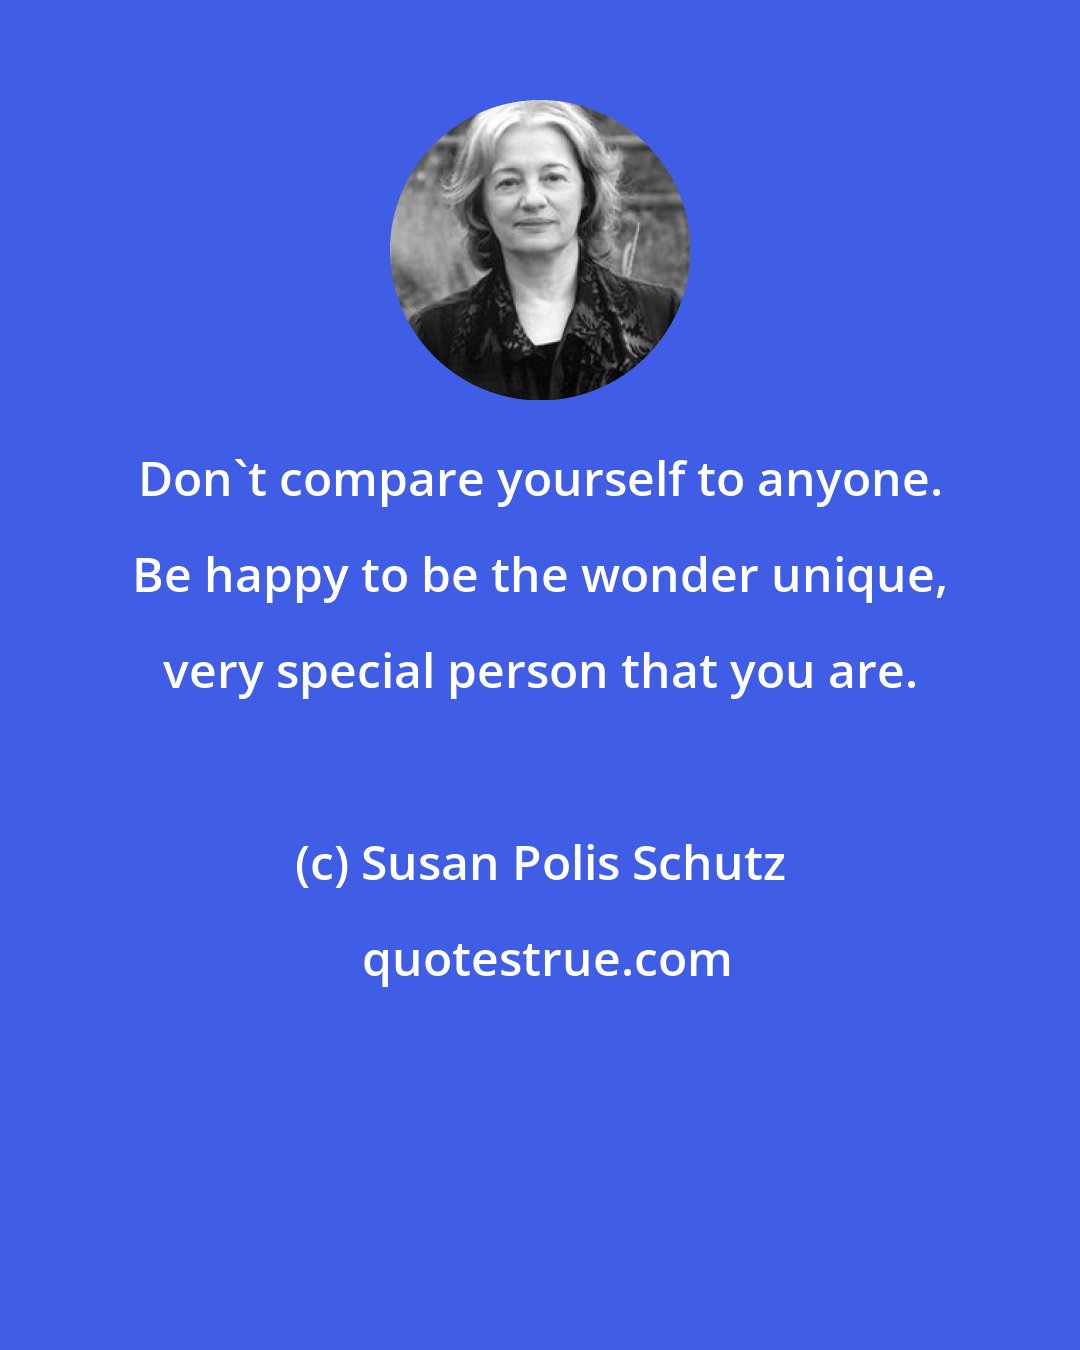 Susan Polis Schutz: Don't compare yourself to anyone. Be happy to be the wonder unique, very special person that you are.